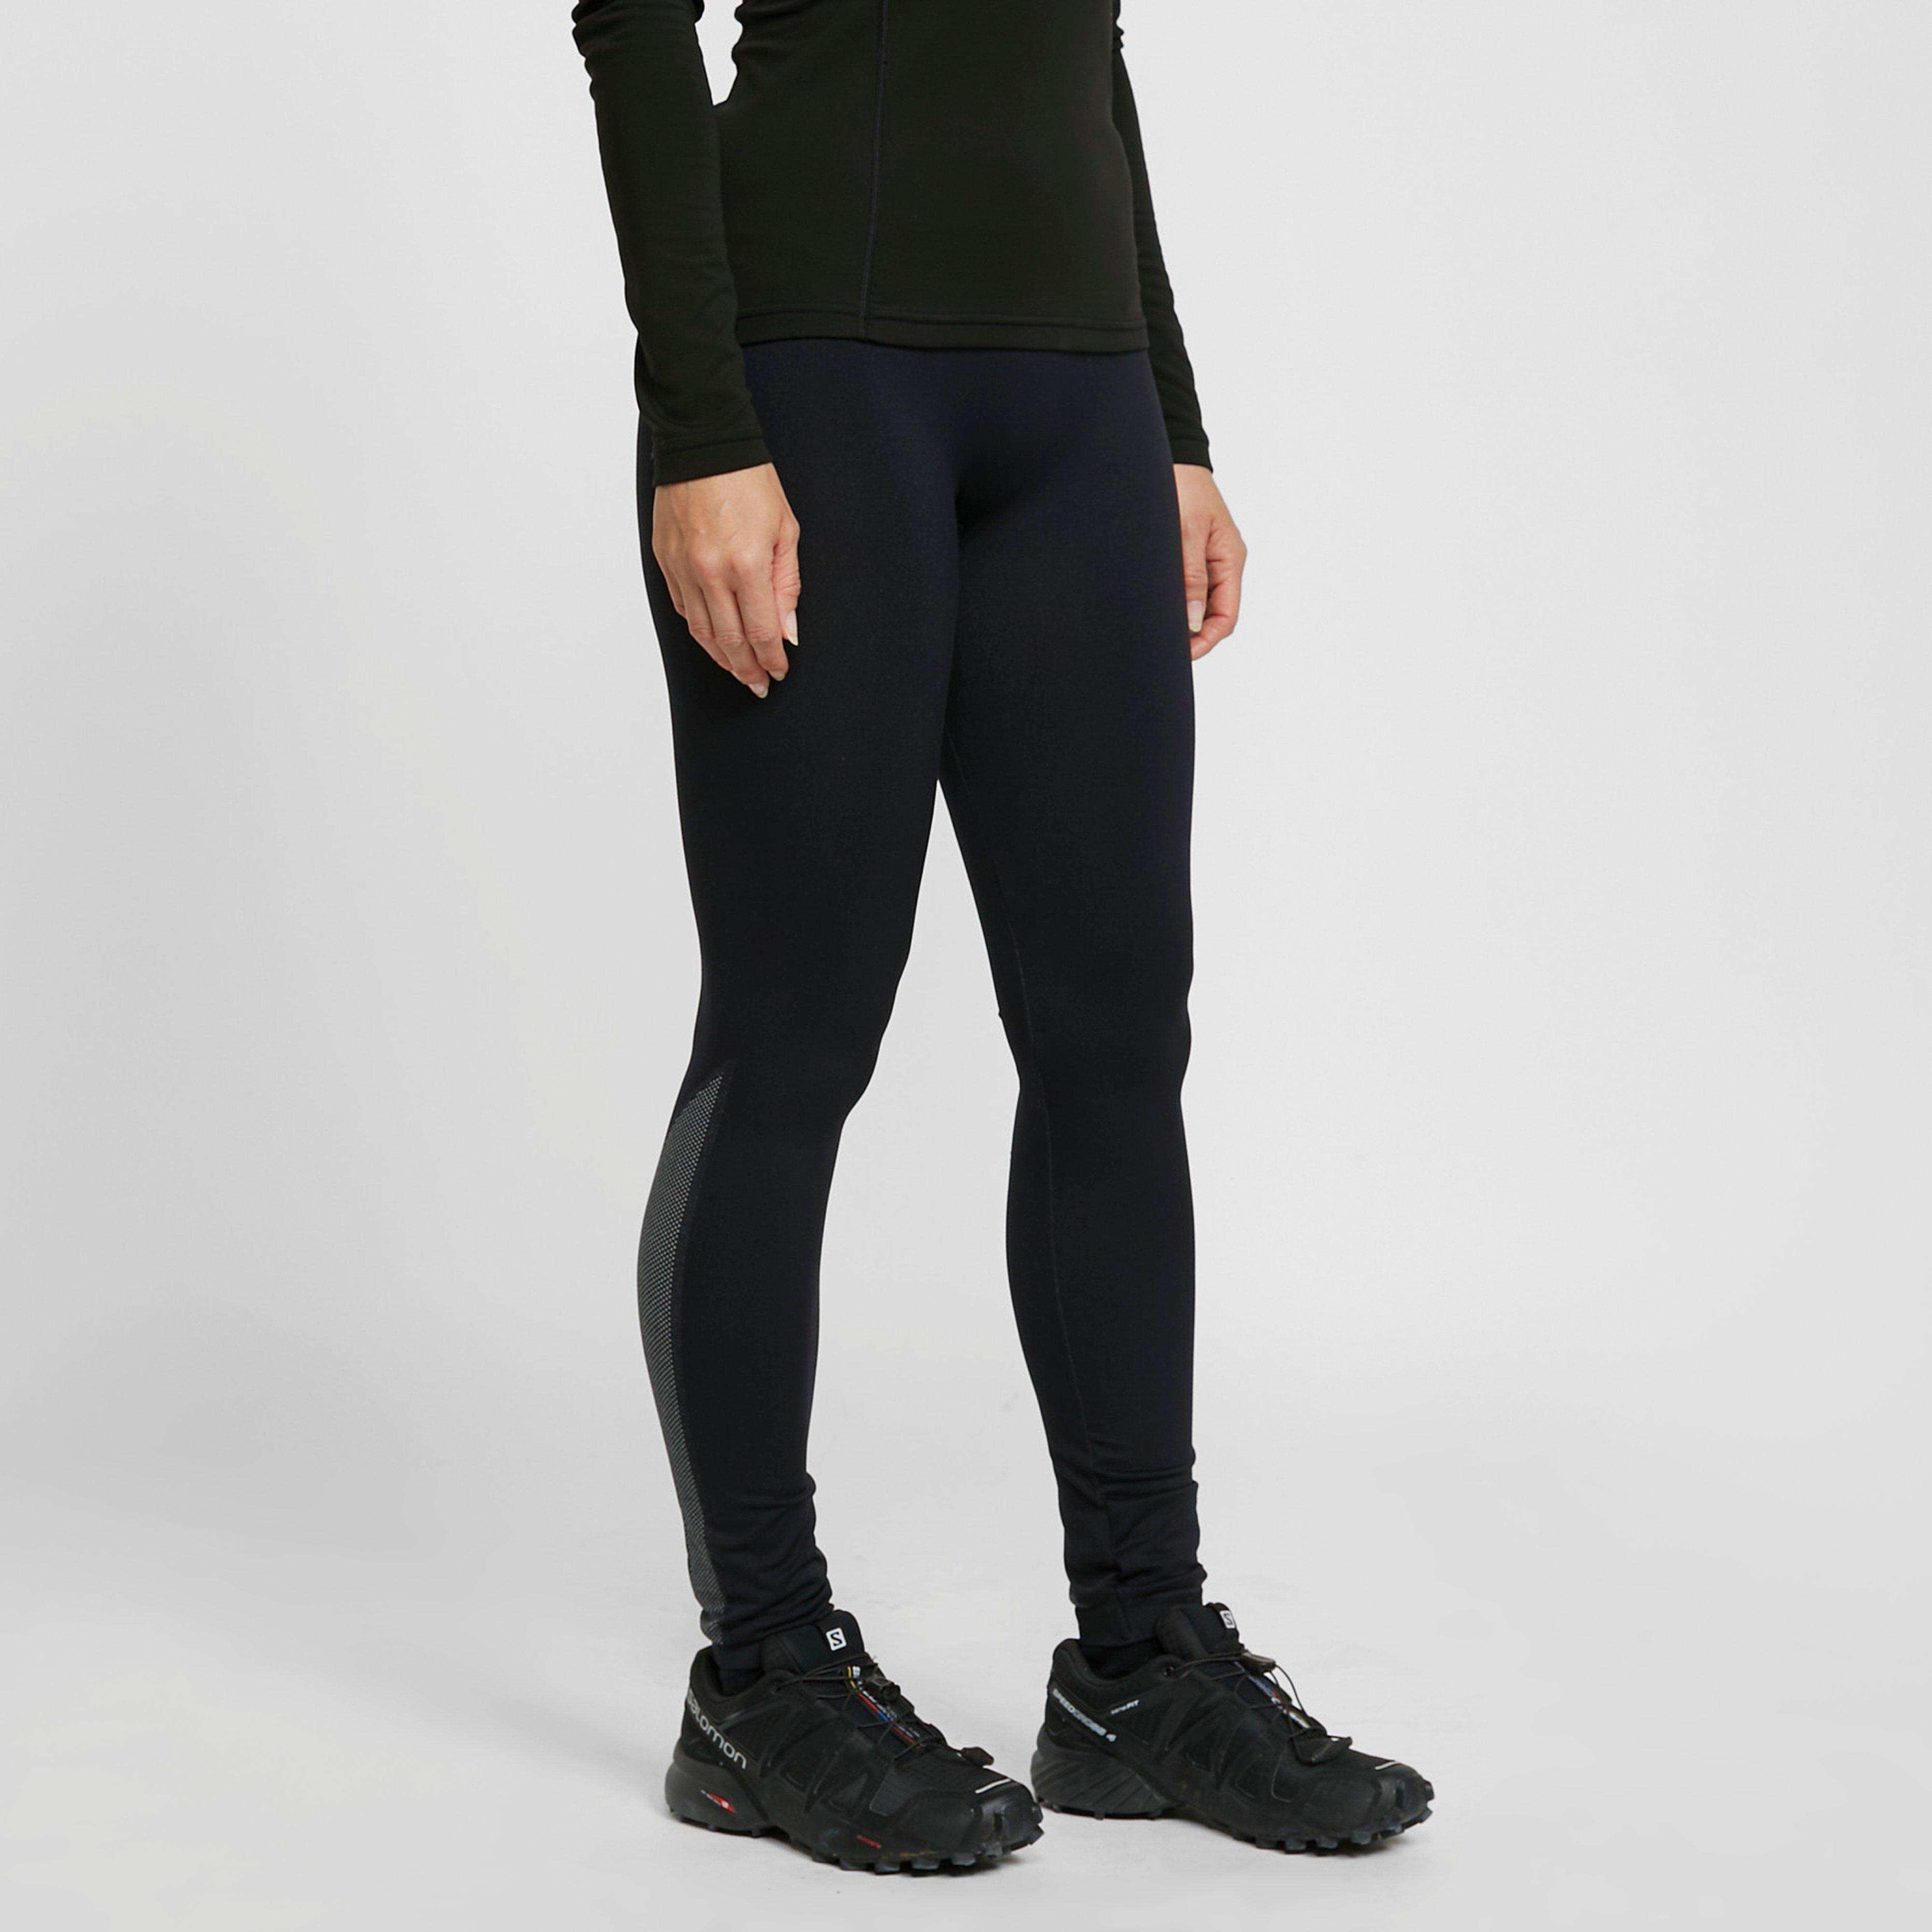 The Edge Womens Flow Form Baselayer Tights - Black/wome  Black/wome